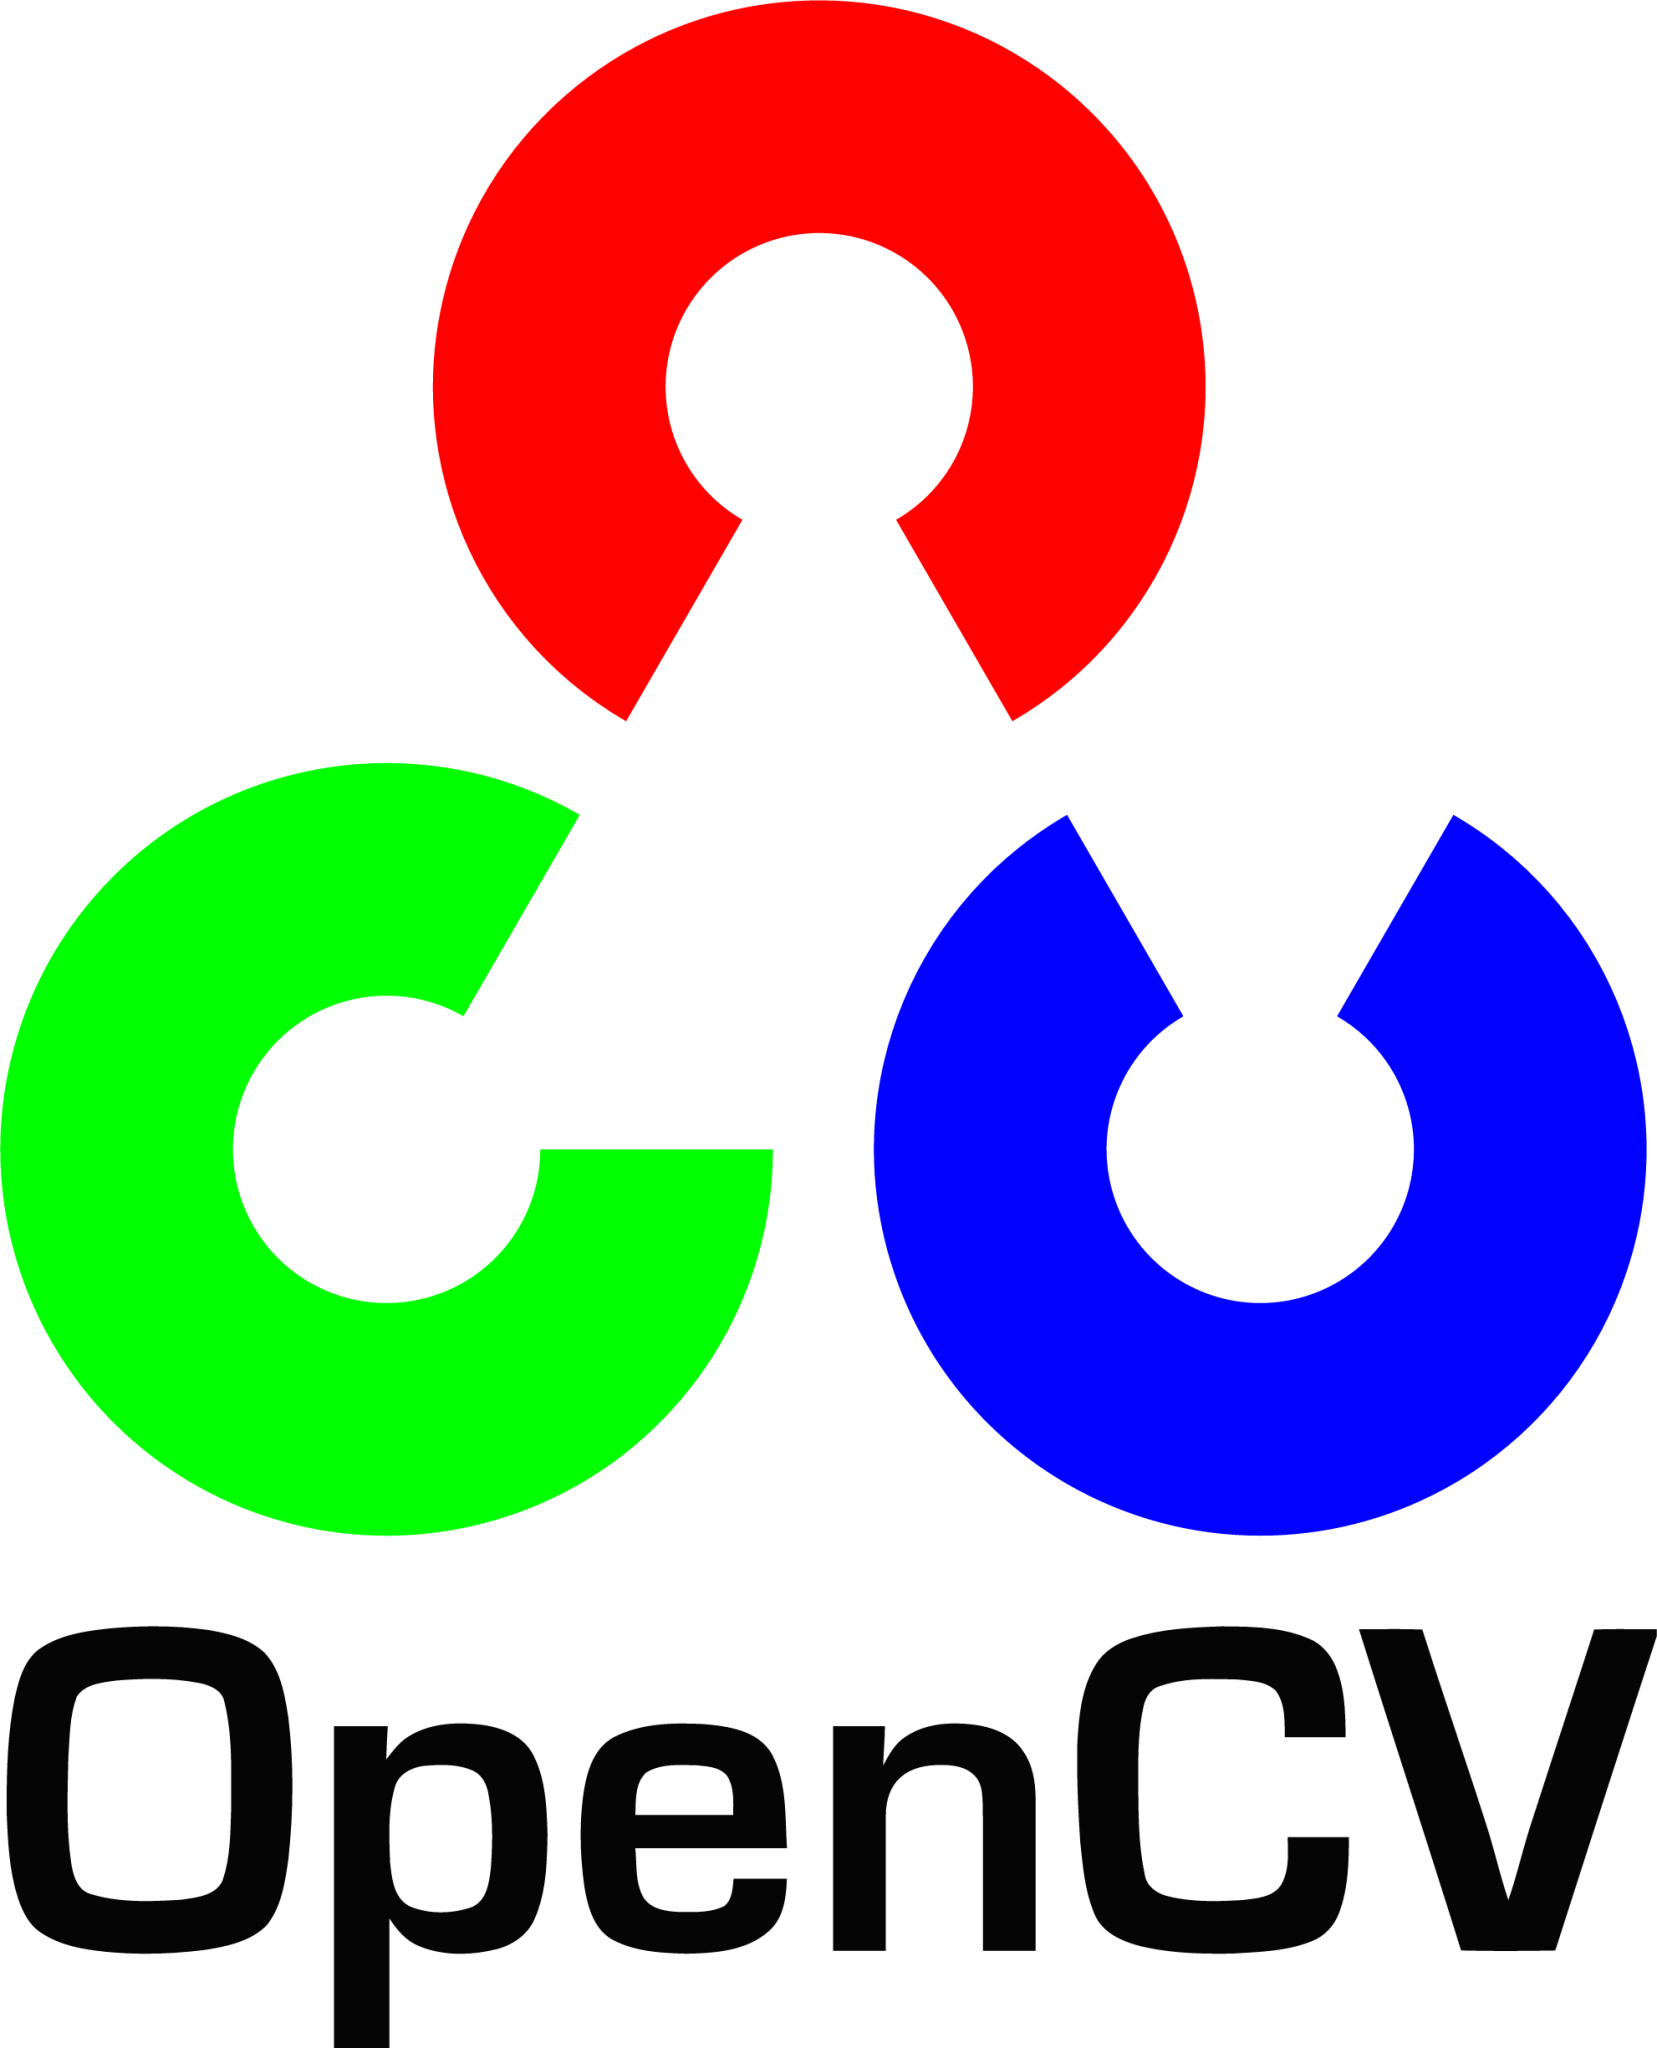 Practical OpenCV with Python from Zero to Hero